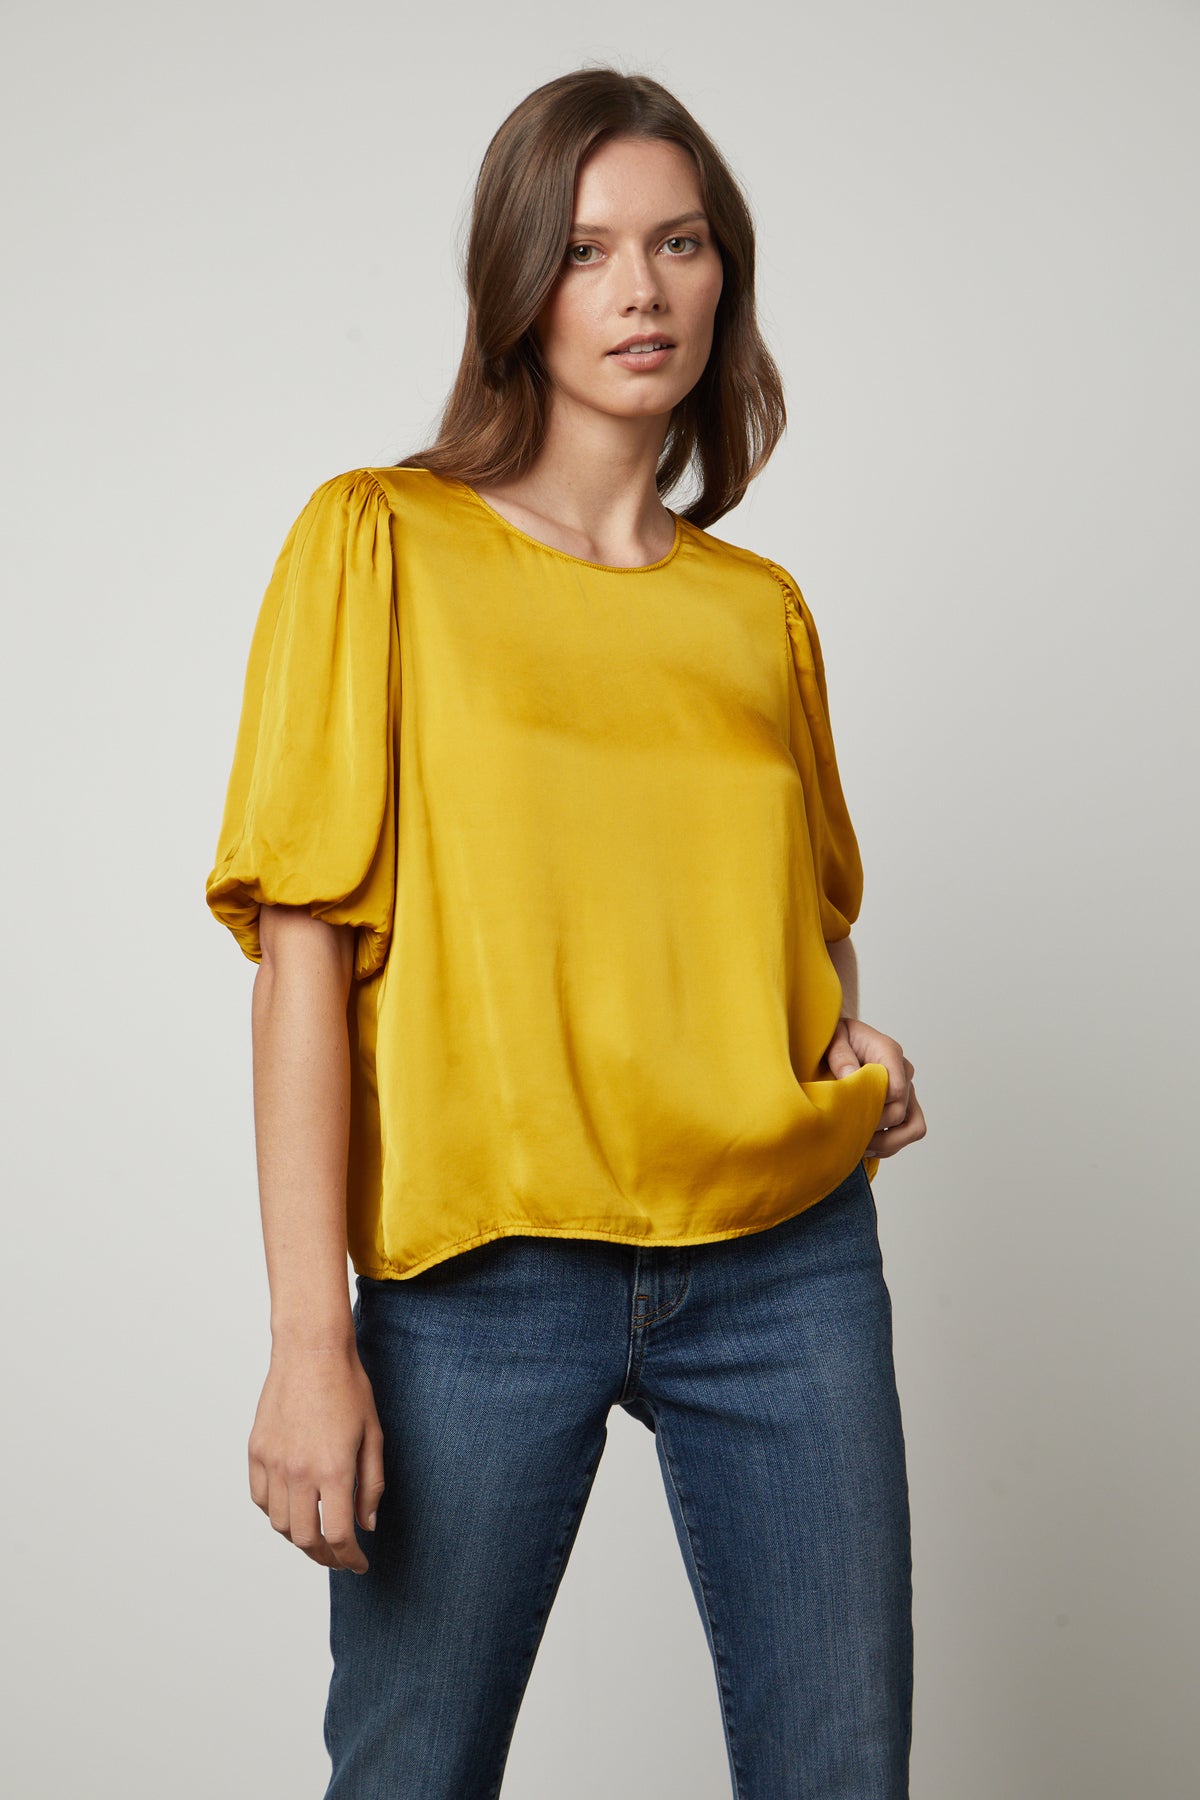 The model is wearing a yellow DESI SATIN PUFF SLEEVE TOP by Velvet by Graham & Spencer.-35656169423041